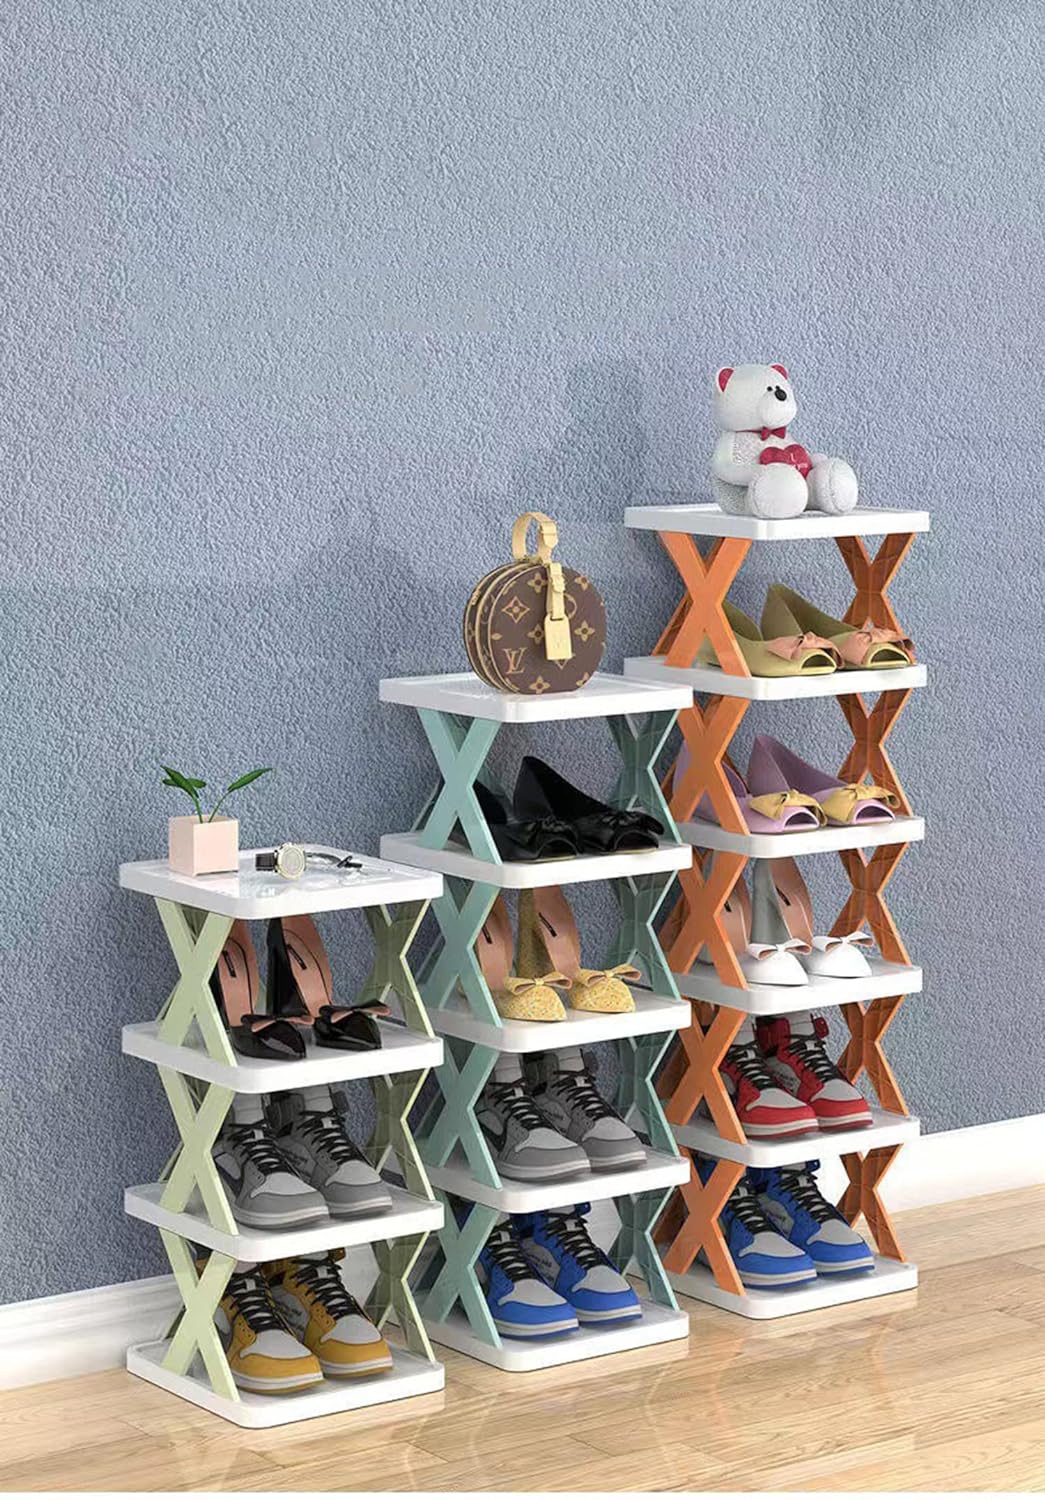 4 Tier Shoes Storage Cabinet for Saving Space-Green